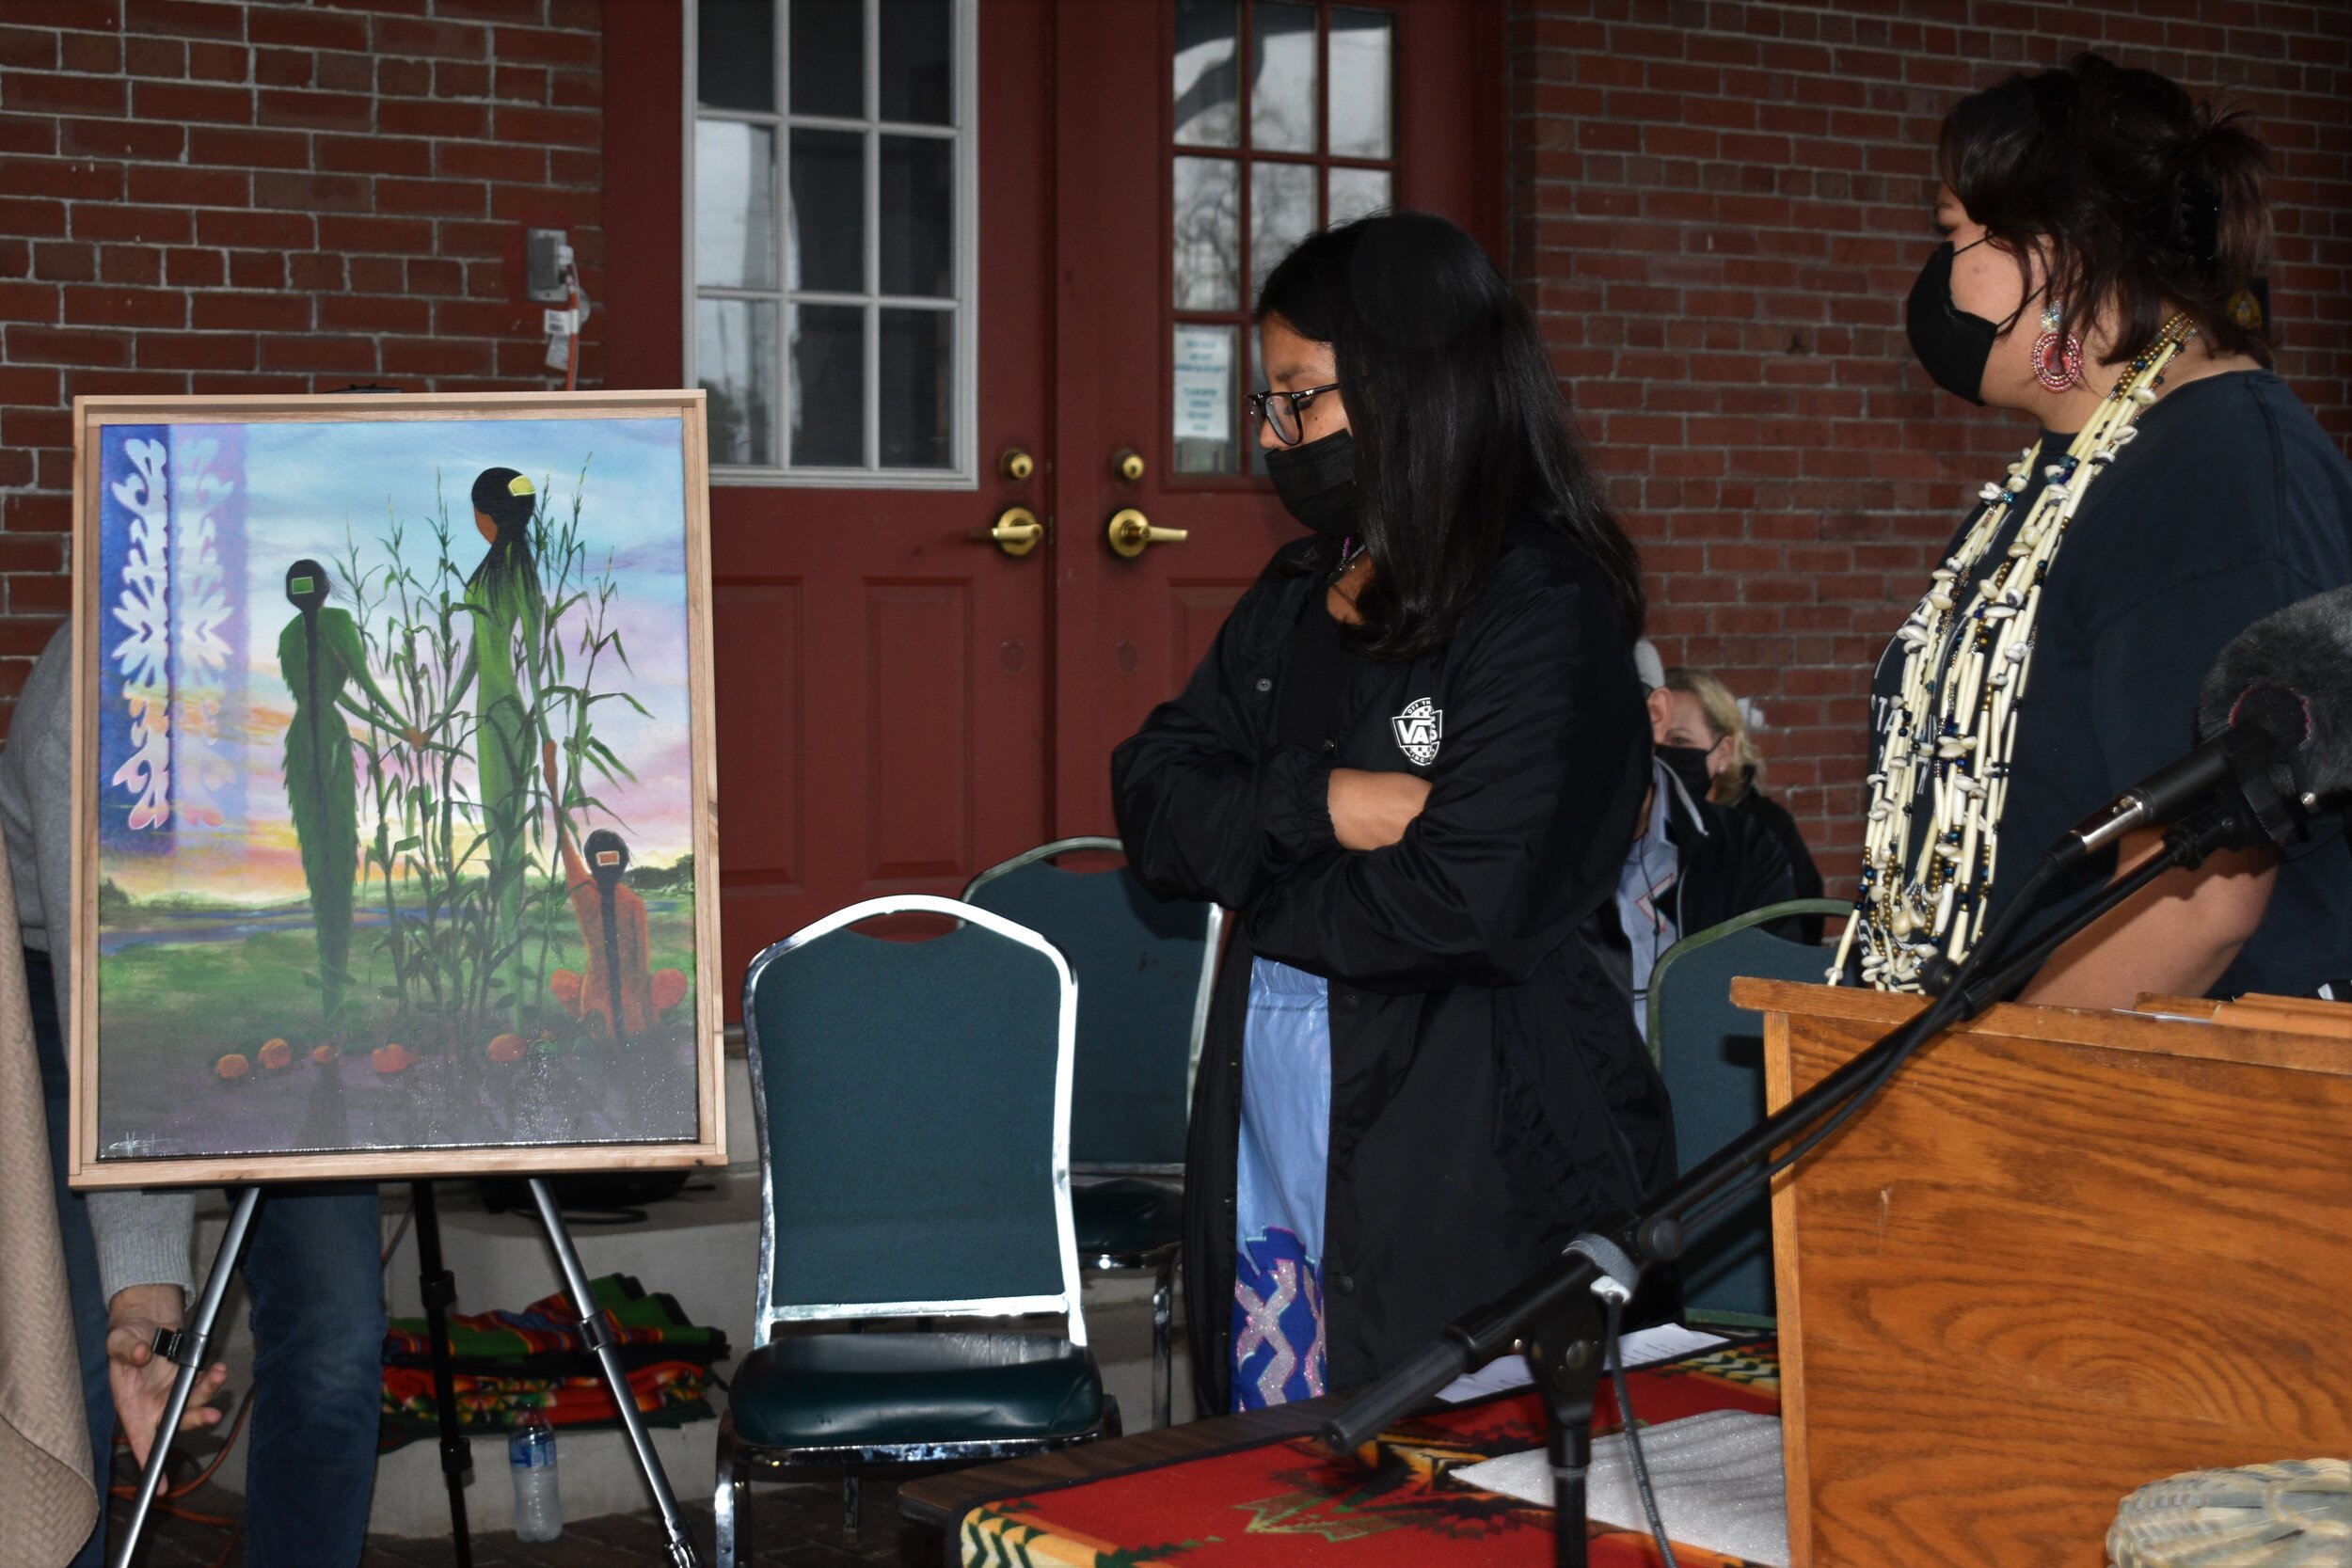  Indigenous Students United of Baraboo High School representatives receive a painting titled ‘The Three Sisters’ painted by Hoocąk/Ojibwe artist Christopher Sweet 